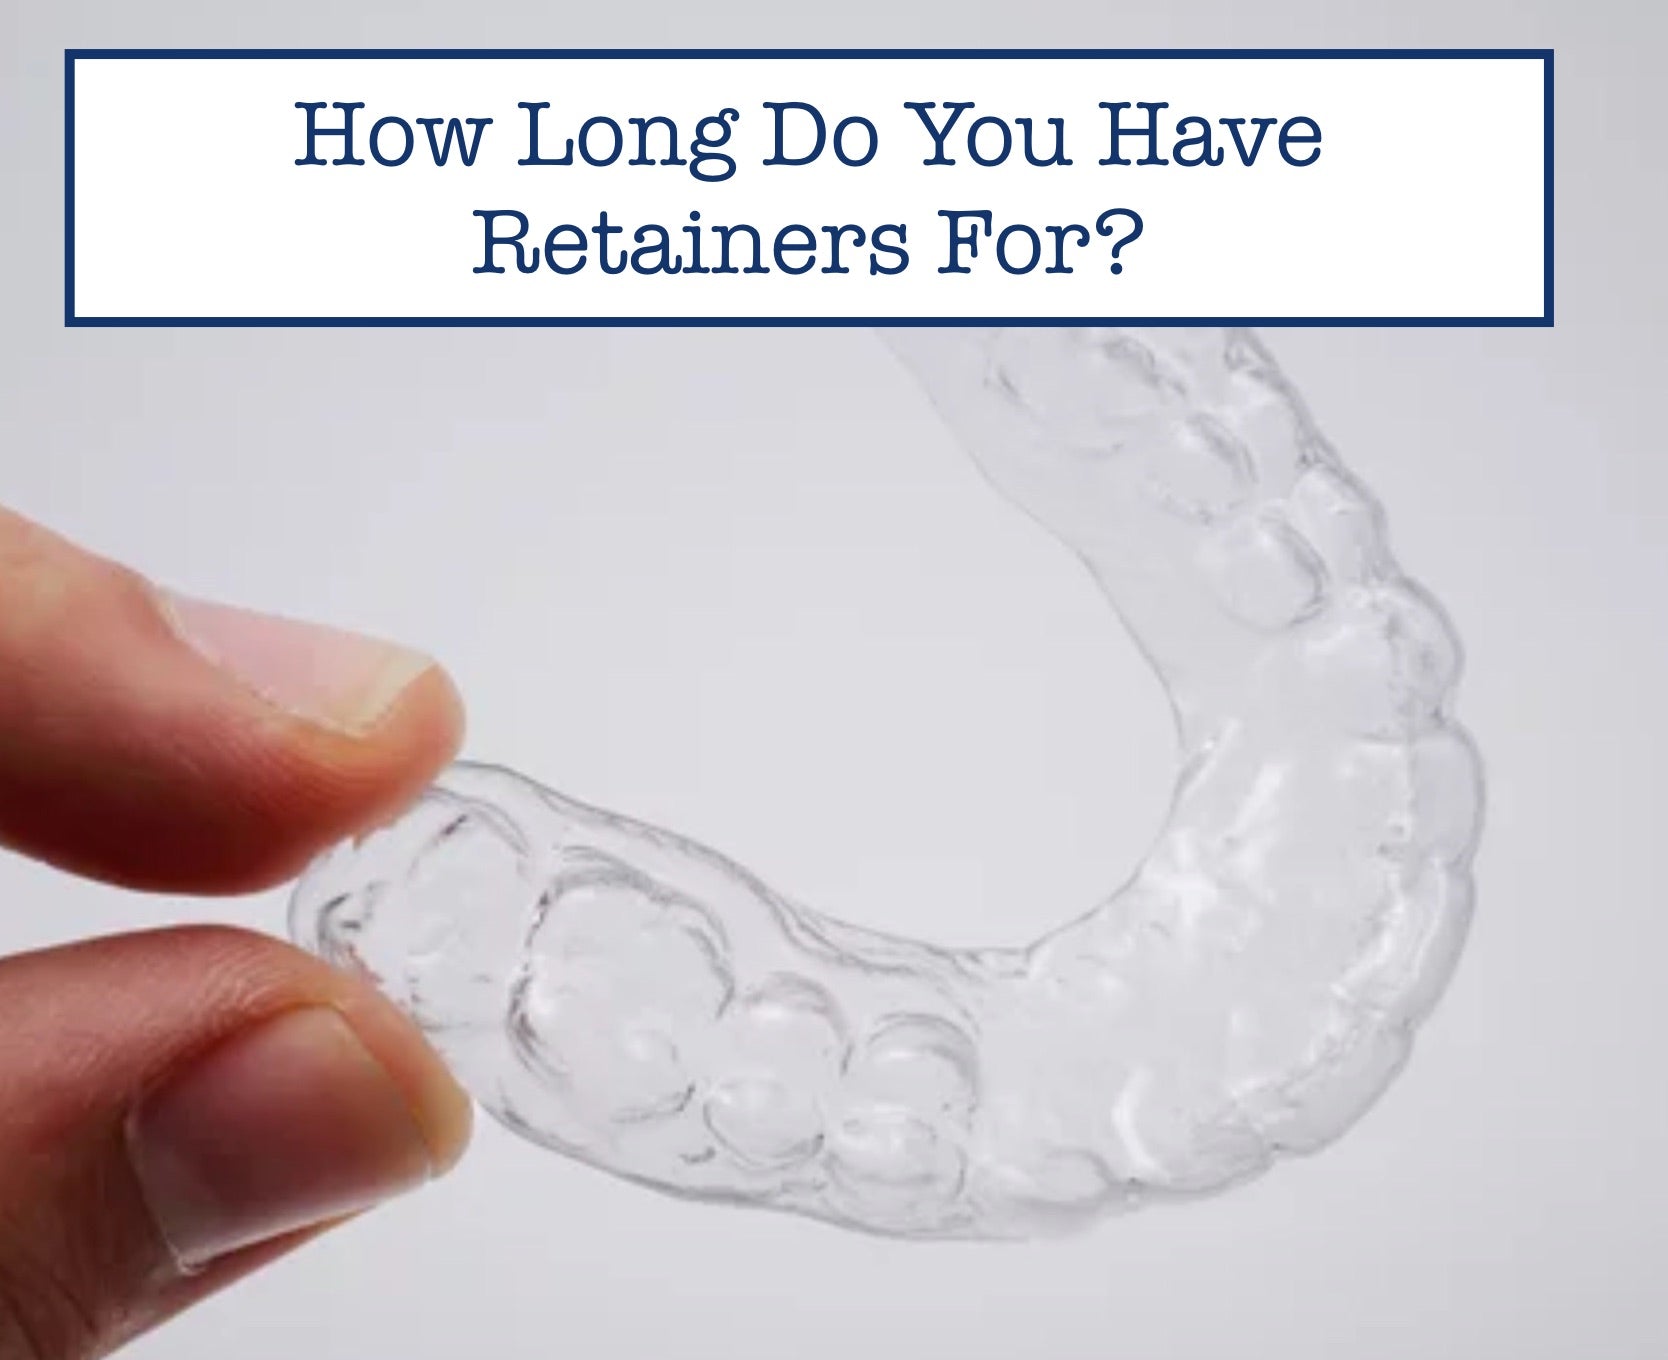 How Long Do You Have Retainers For?